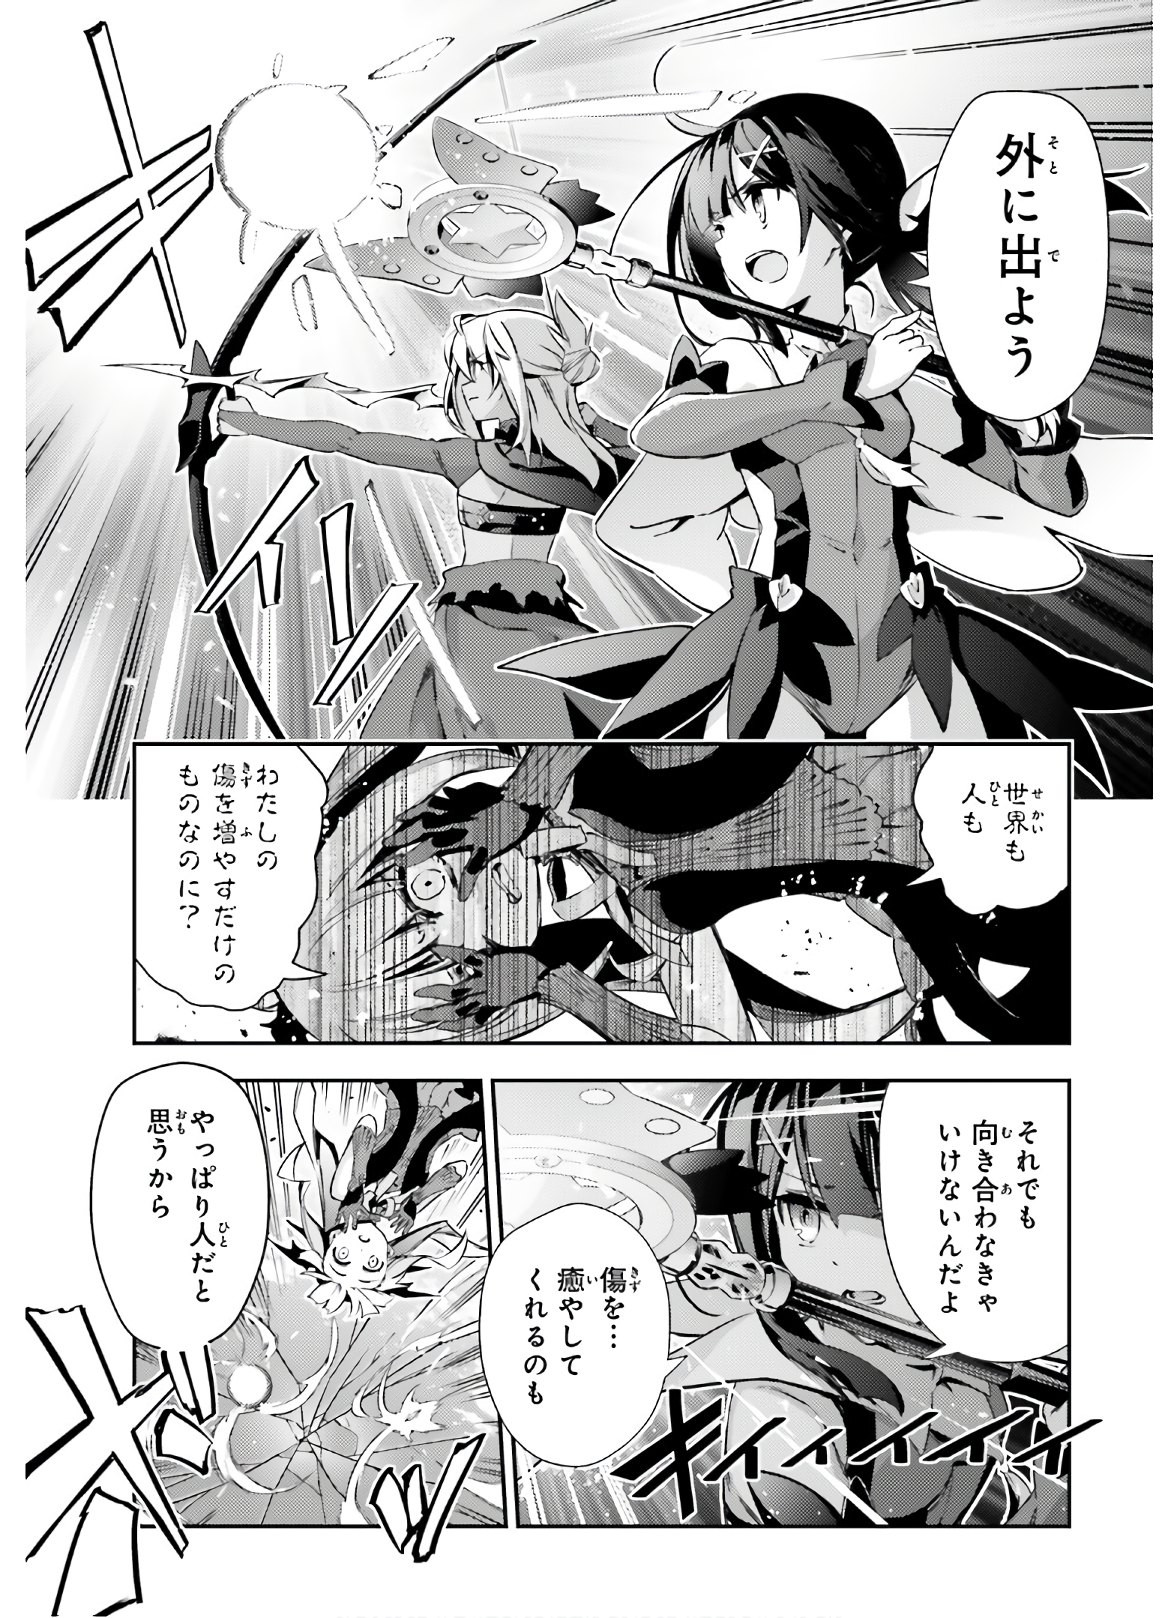 Fate/Kaleid Liner Prisma Illya Drei! - Chapter 57-1 - Page 11